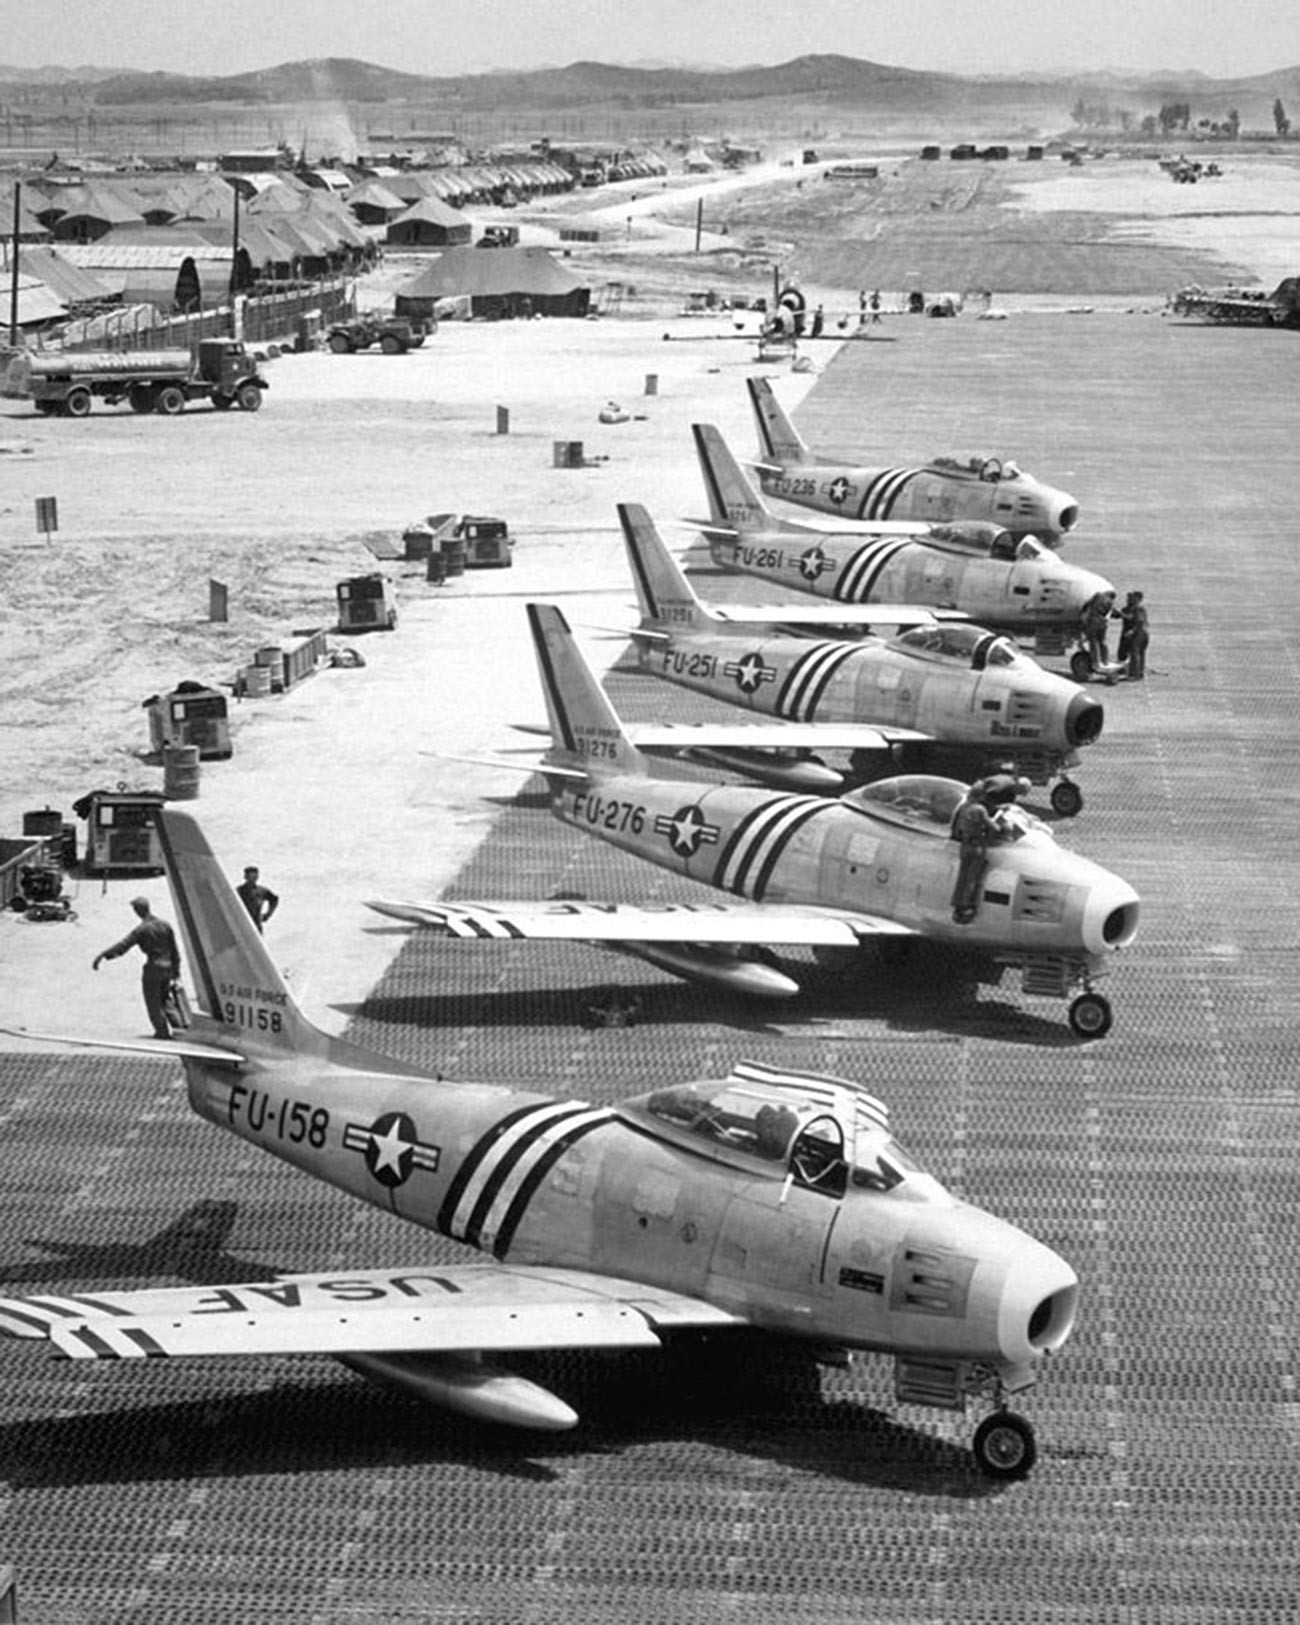 View of F-86 airplanes on the flight line getting ready for combat.